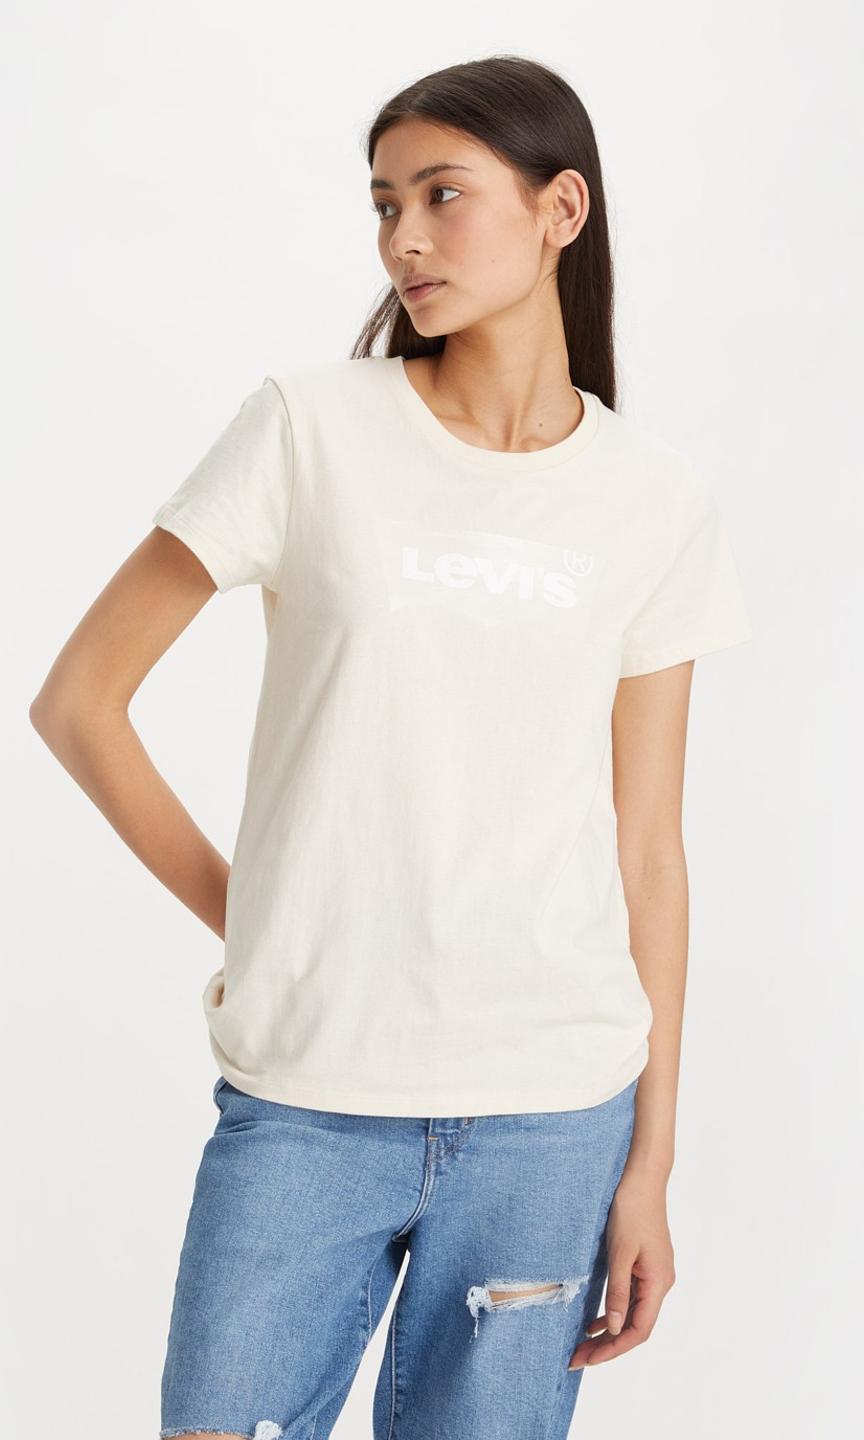 Buy Levi's® Women's Perfect Tee | Levi’s® Official Online Store TH